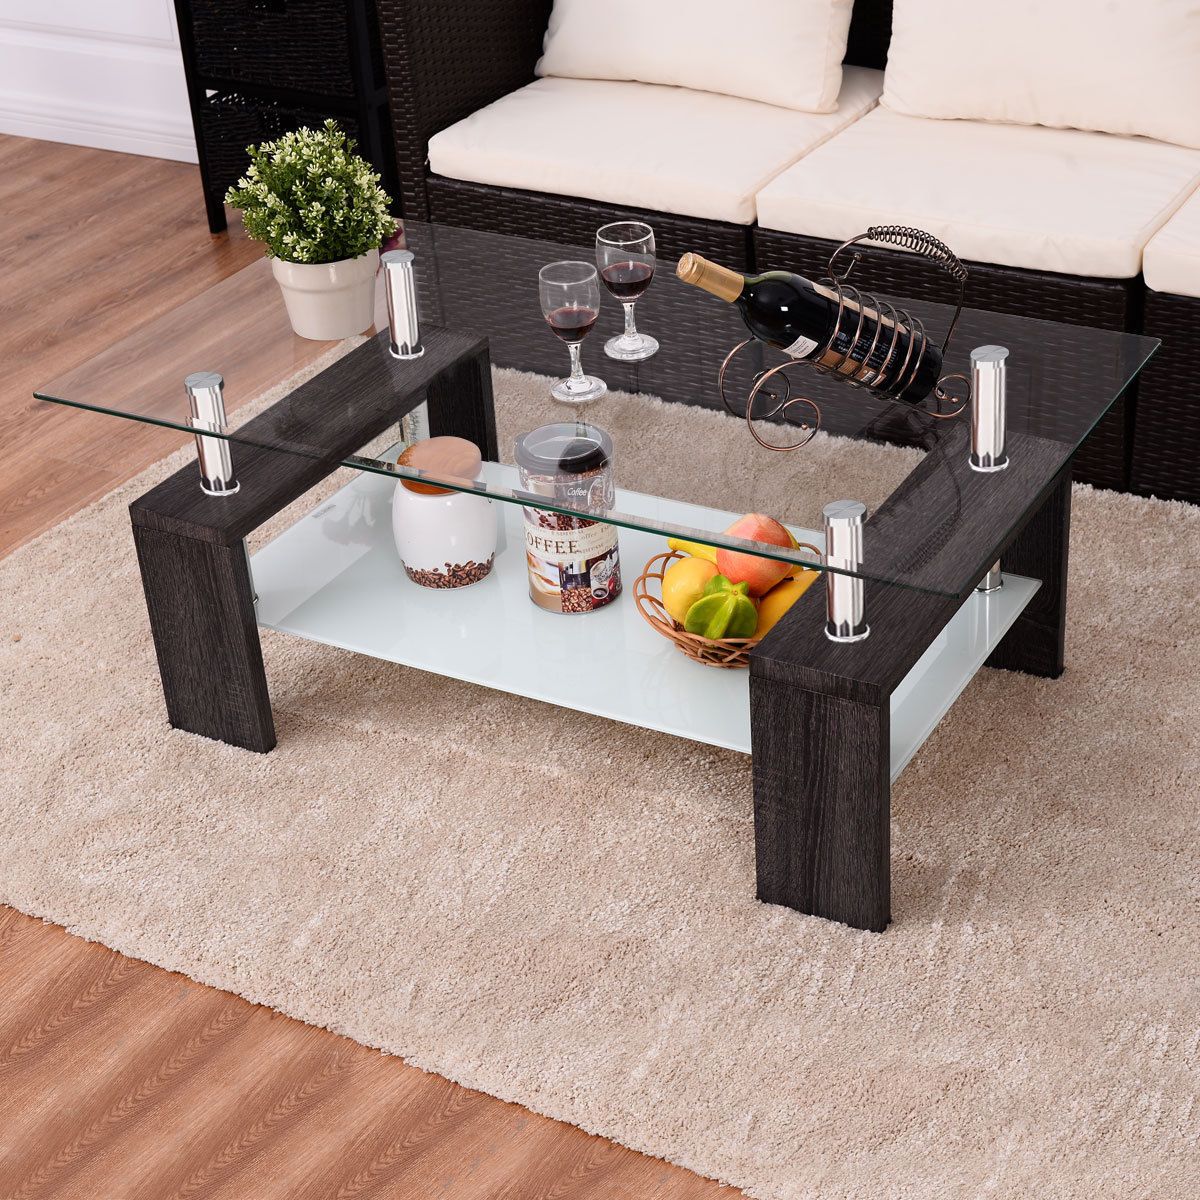 Wood Tempered Glass Top Coffee Table Rectangular W/ Shelf Throughout Wood Rectangular Coffee Tables (View 2 of 15)